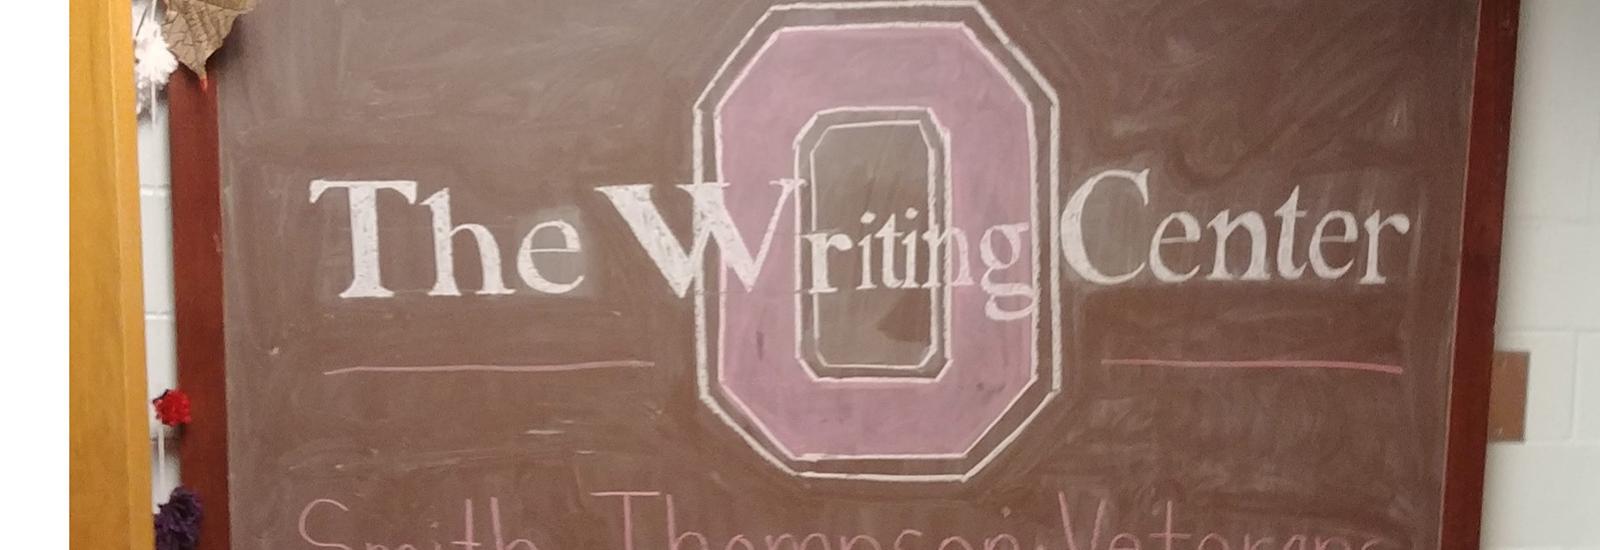 Chalk Board at Entrance to the Writing Center, with text in front of block O: CSTW Fostering Excellence, The Writing Center